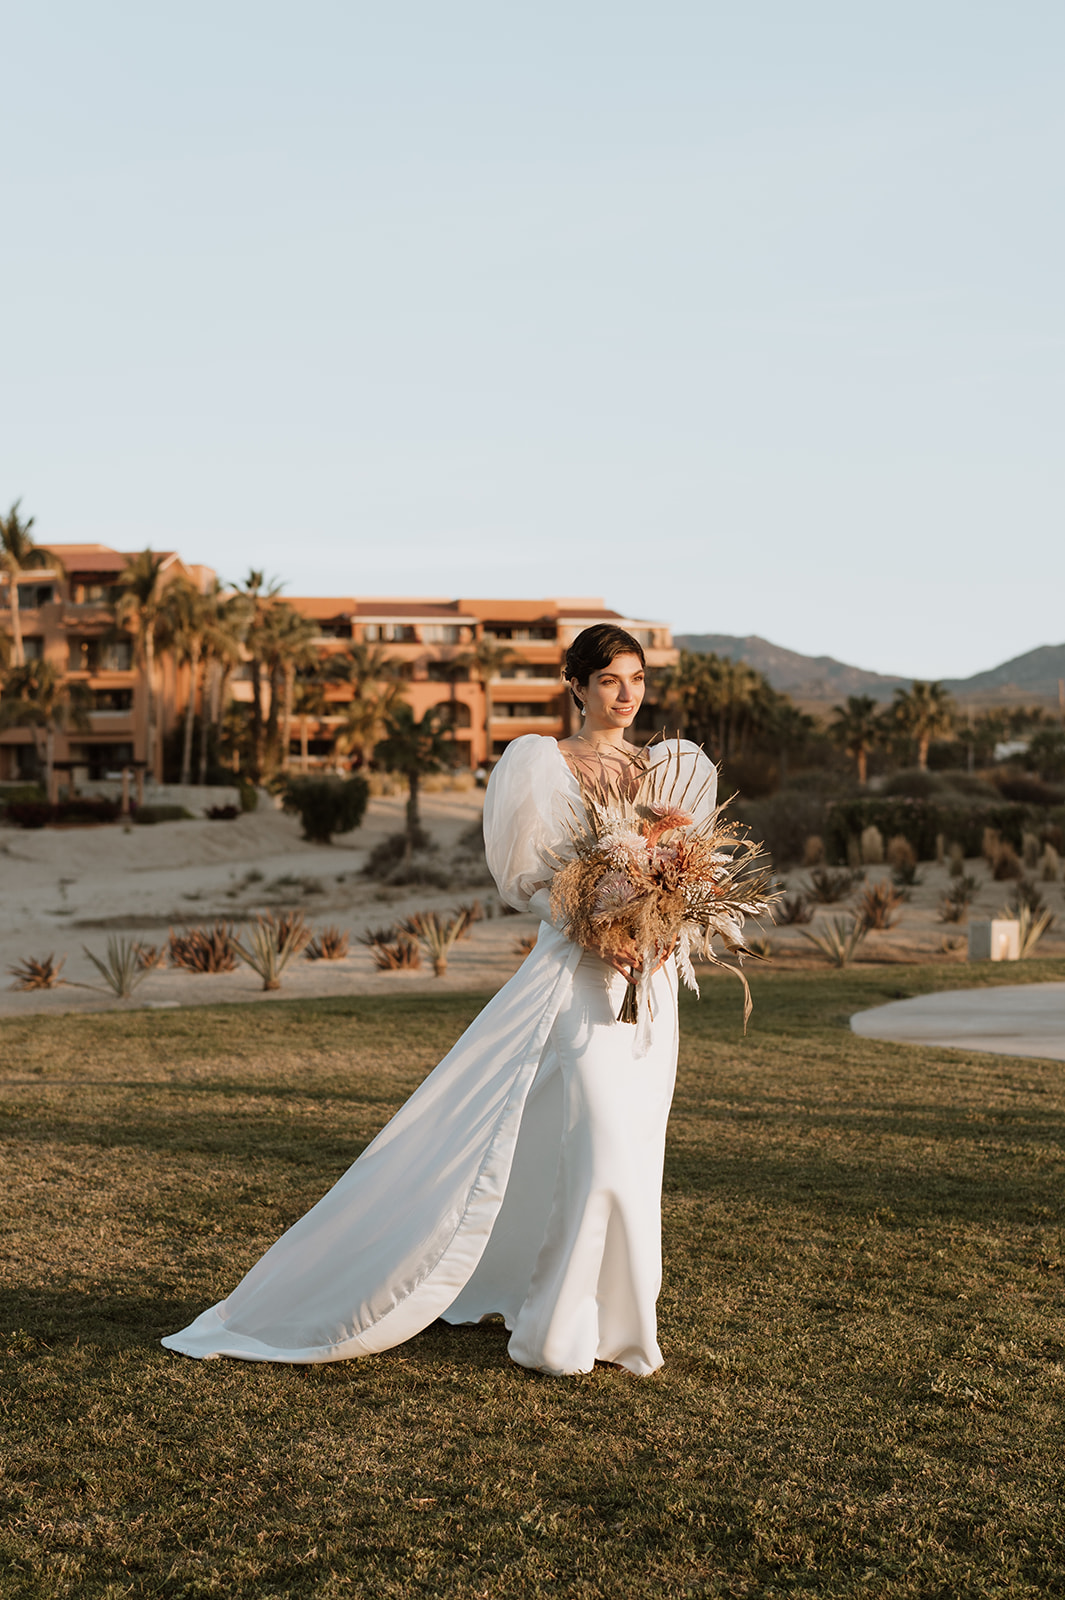 A chic elopement in San Jose del Cabo